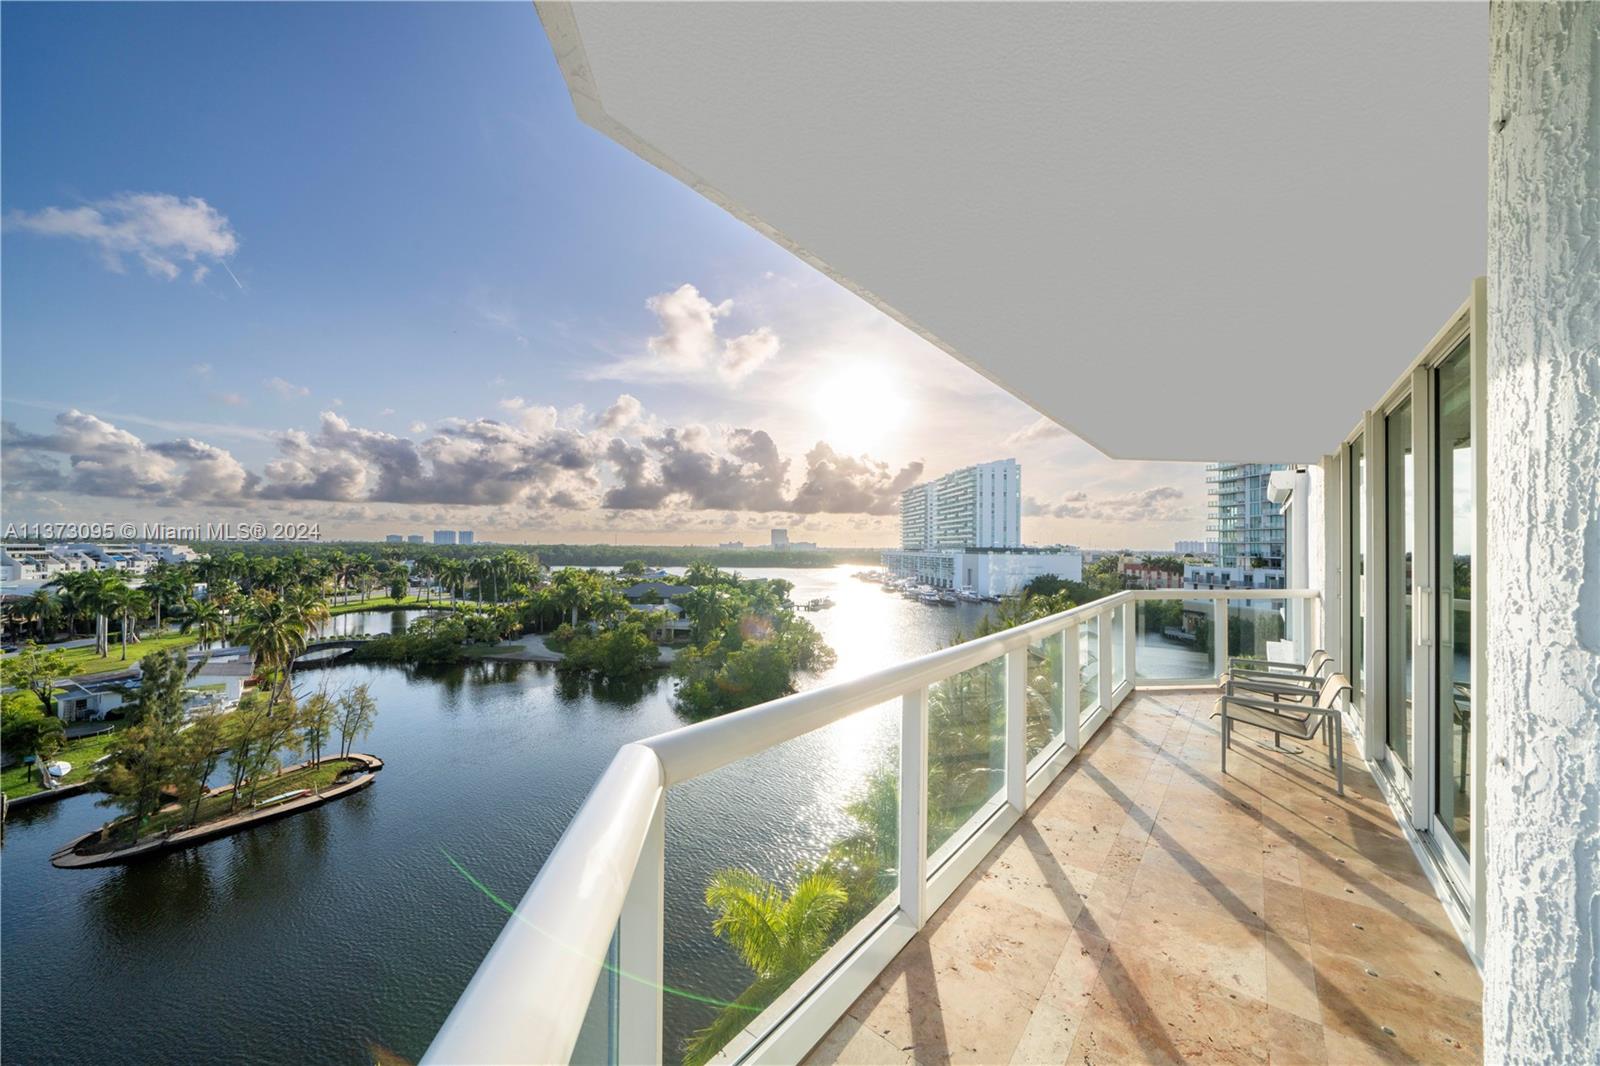 Walk to Haulover Beach! Best price per Sq.Ft. in Oceania V! Rare & spacious 3BD/3.5BA townhouse in the sky on Oceania Island boasts ocean, intracoastal, state park & lagoon views. Elevator foyer entry from both floors, large living/dining room, chefs kitchen, flowing den/media room/home office w/ kitchenette, 2 primary suites plus 3rd ensuite bedrm, all connected by a stunning private circular staircase. Turkish travertine floors, new impact windows, electric shades, custom cabinetry, powder room, laundry room/pantry, & lots of closet space complete your elegant & flexible new home. Well managed, secure, & quiet waterfront building w/ front desk concierge. Exclusive marina, pool deck & beach club. 2 deeded covered parking spots & 2 storage lockers. Funded reserves & no current assessments.